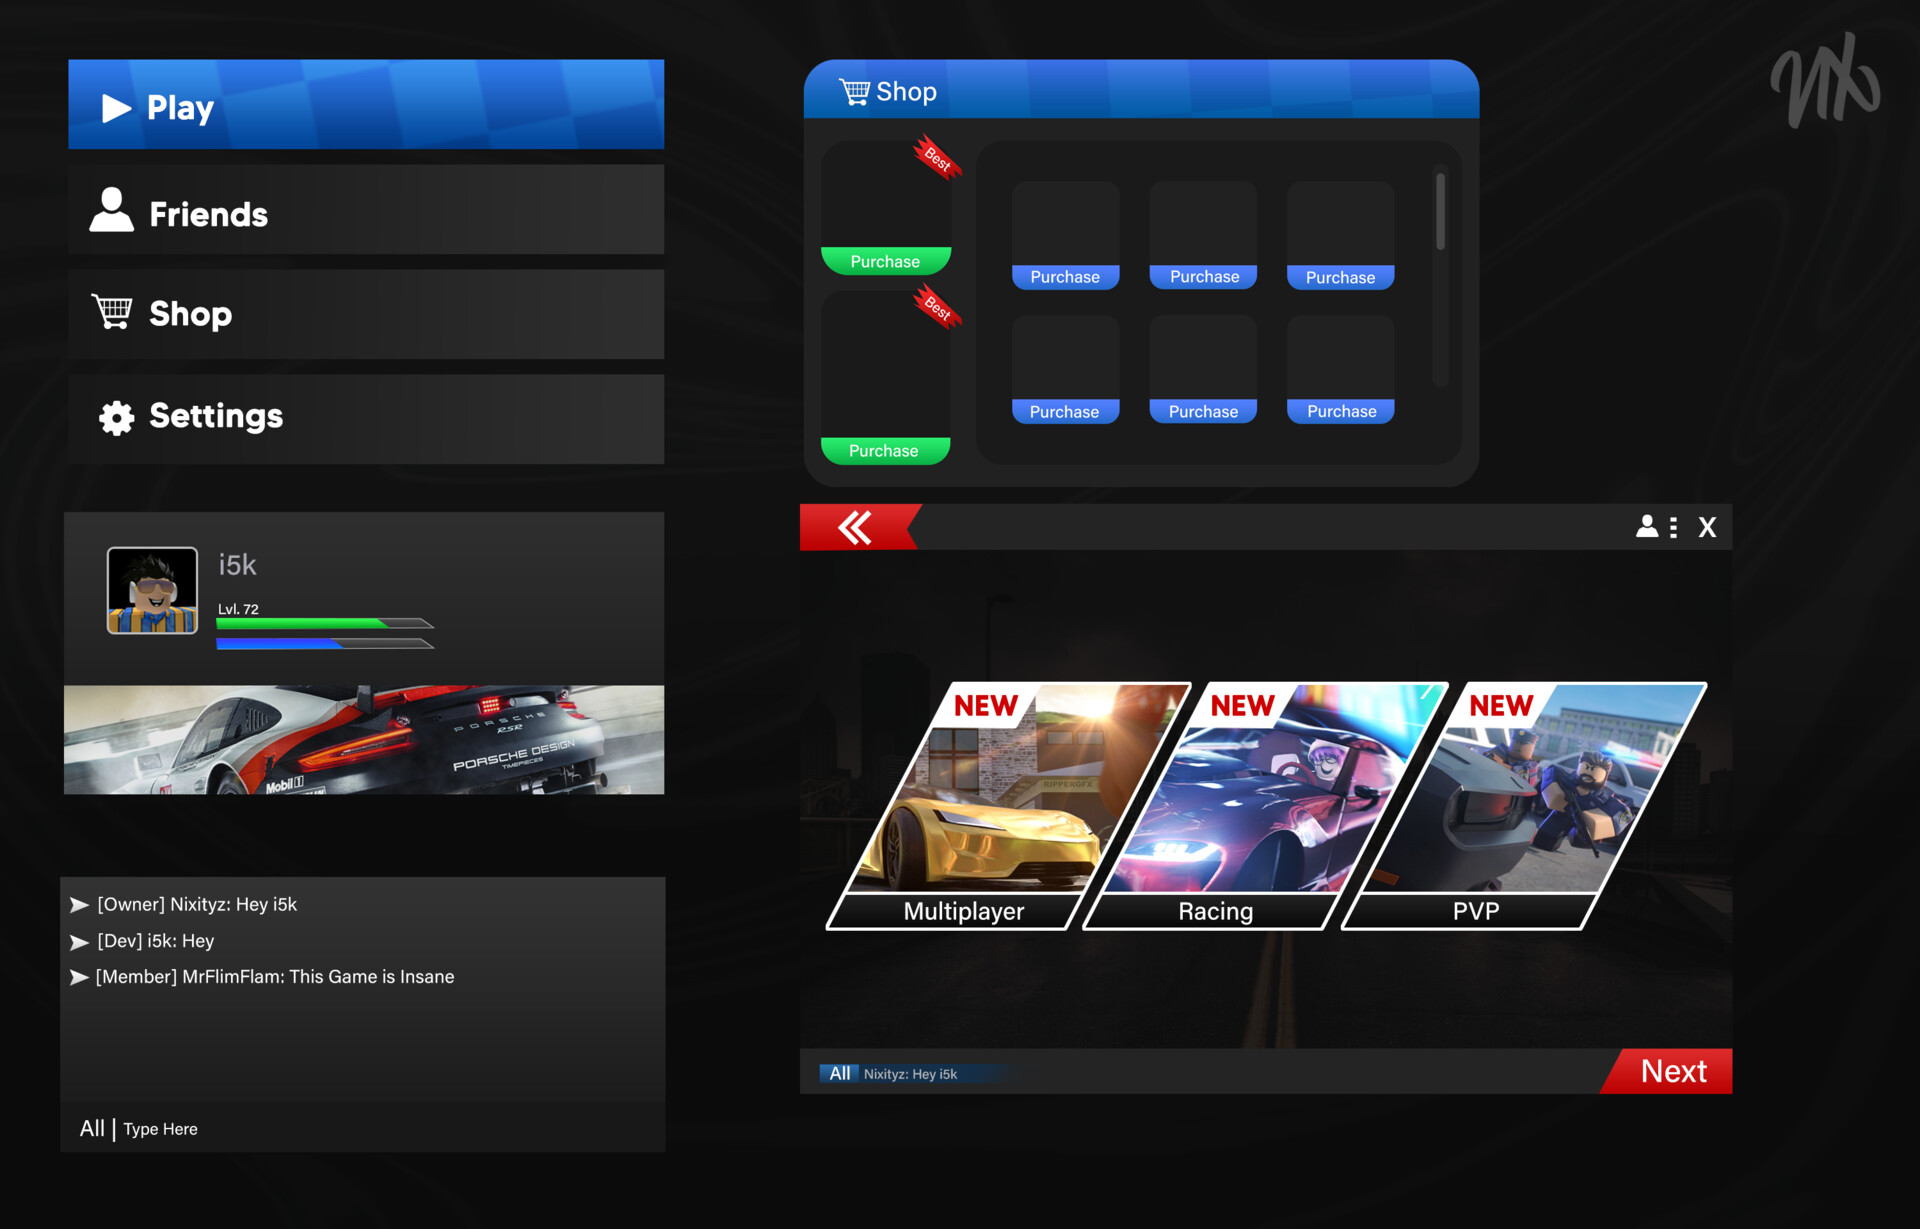 ArtStation - A Roblox One-Piece Game User-Interface Design